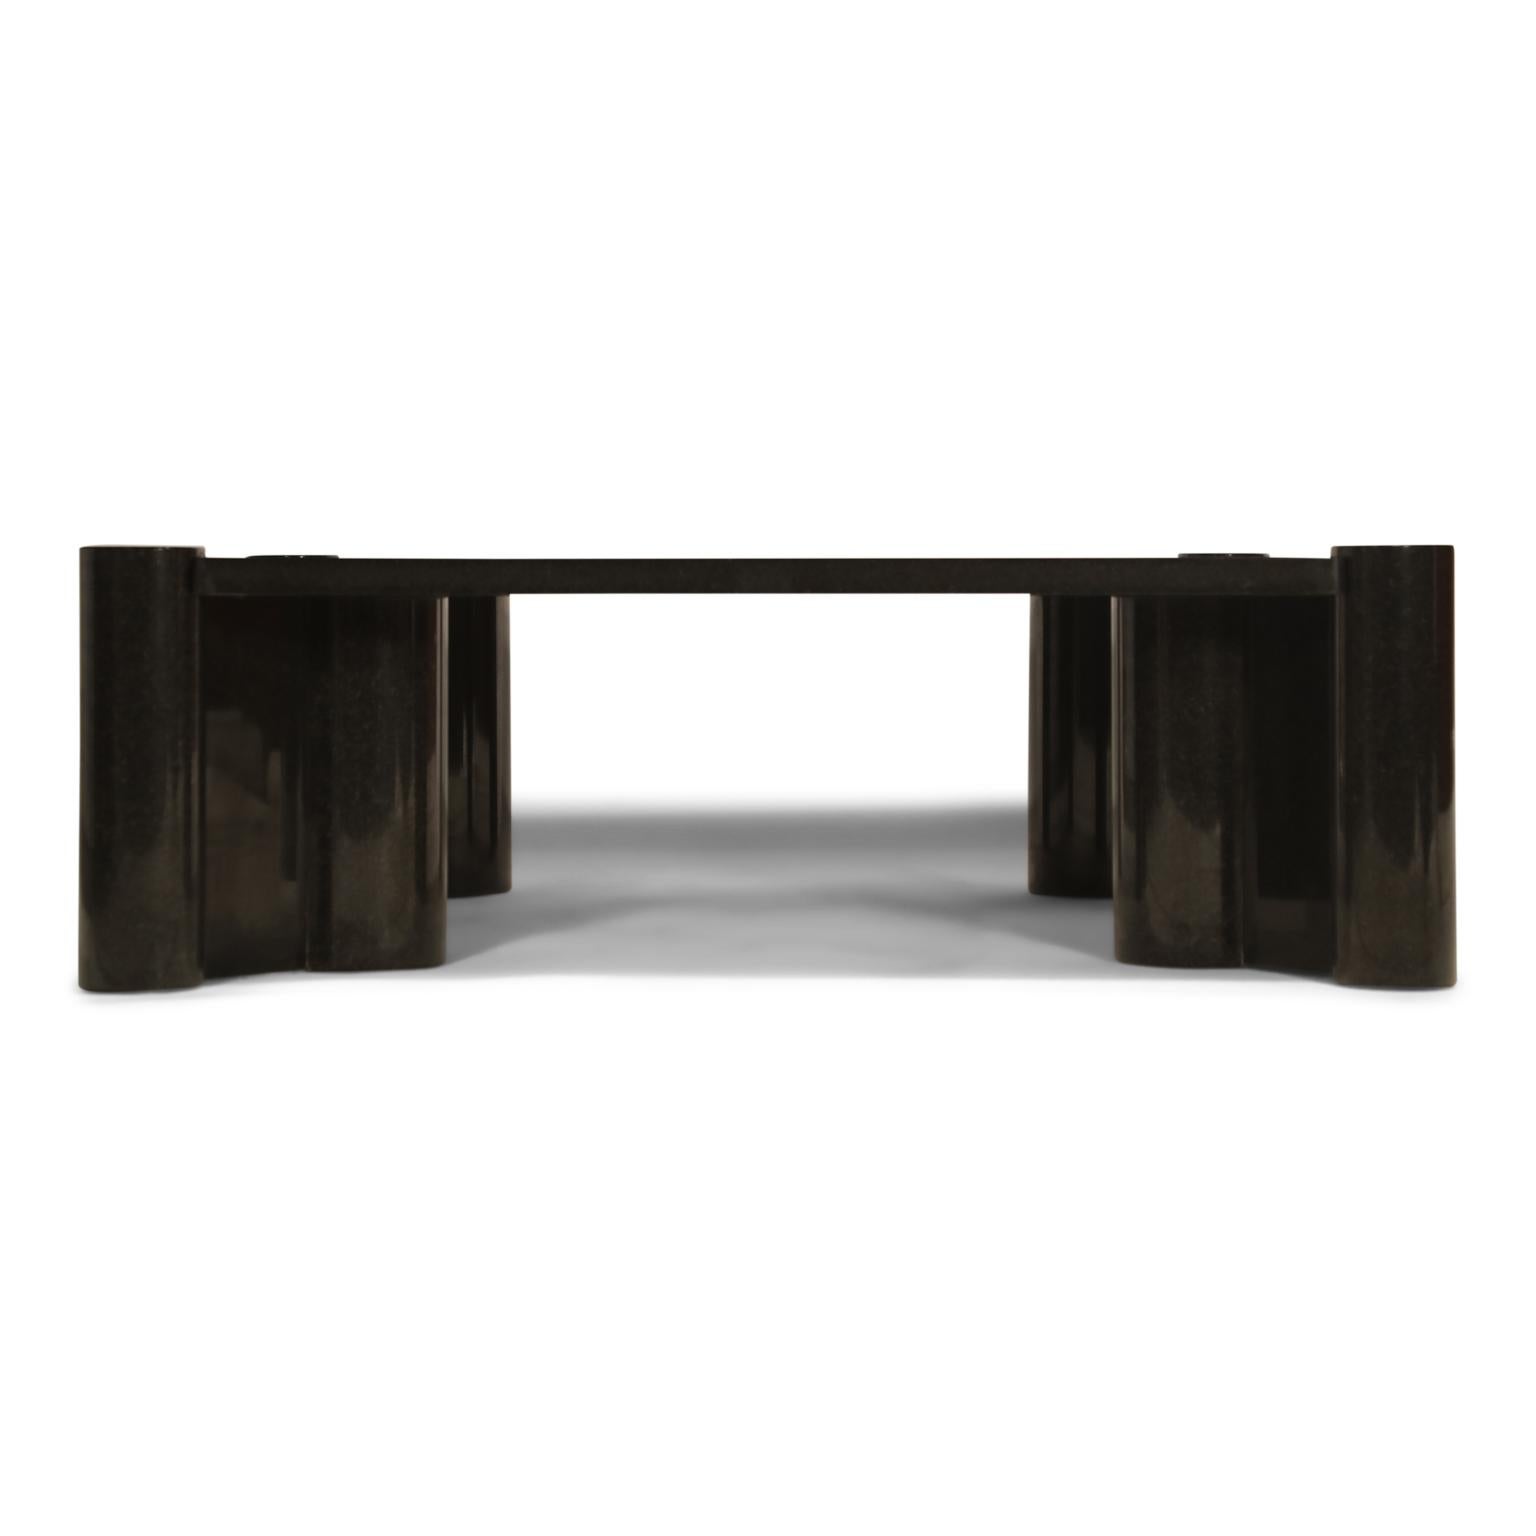 This table is a showstopper - a custom ordered, in deep black polished granite, 1980s produced by Knoll International, 